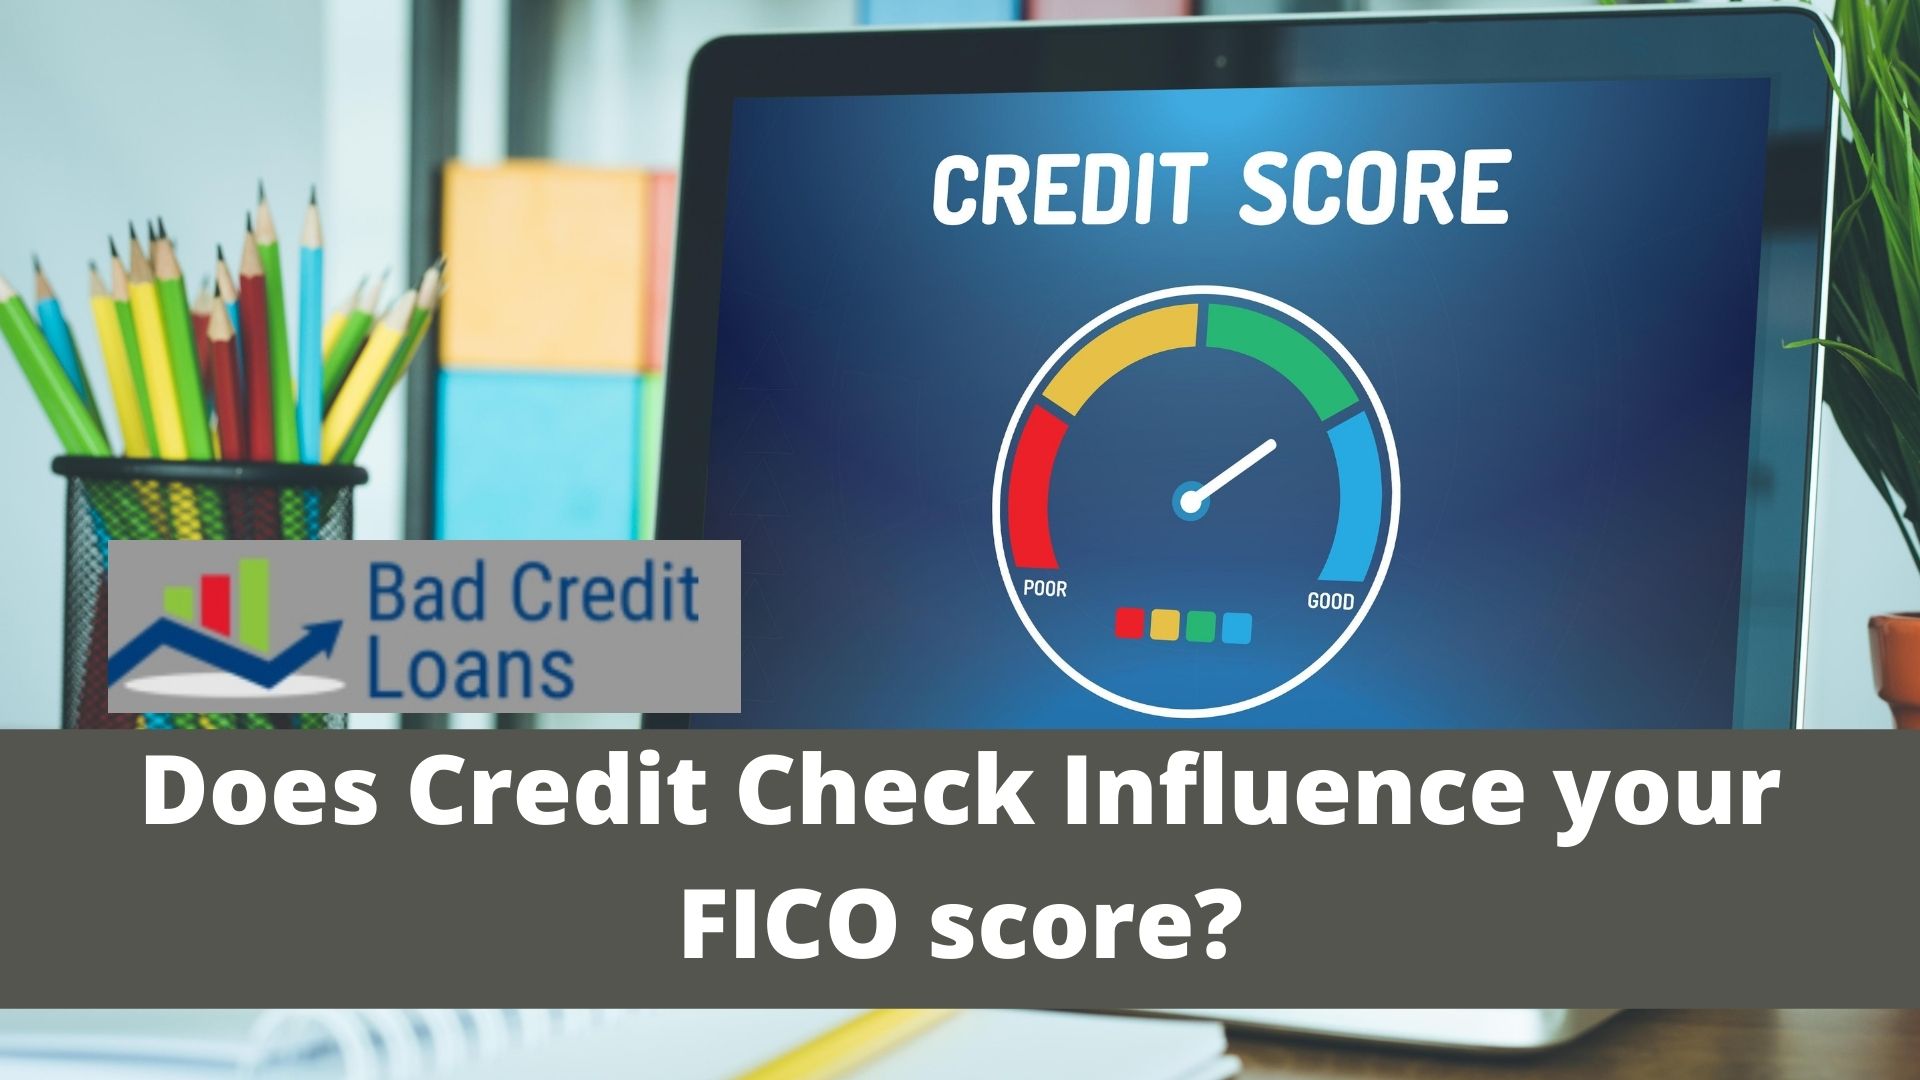 Which of the following most influences your credit score?